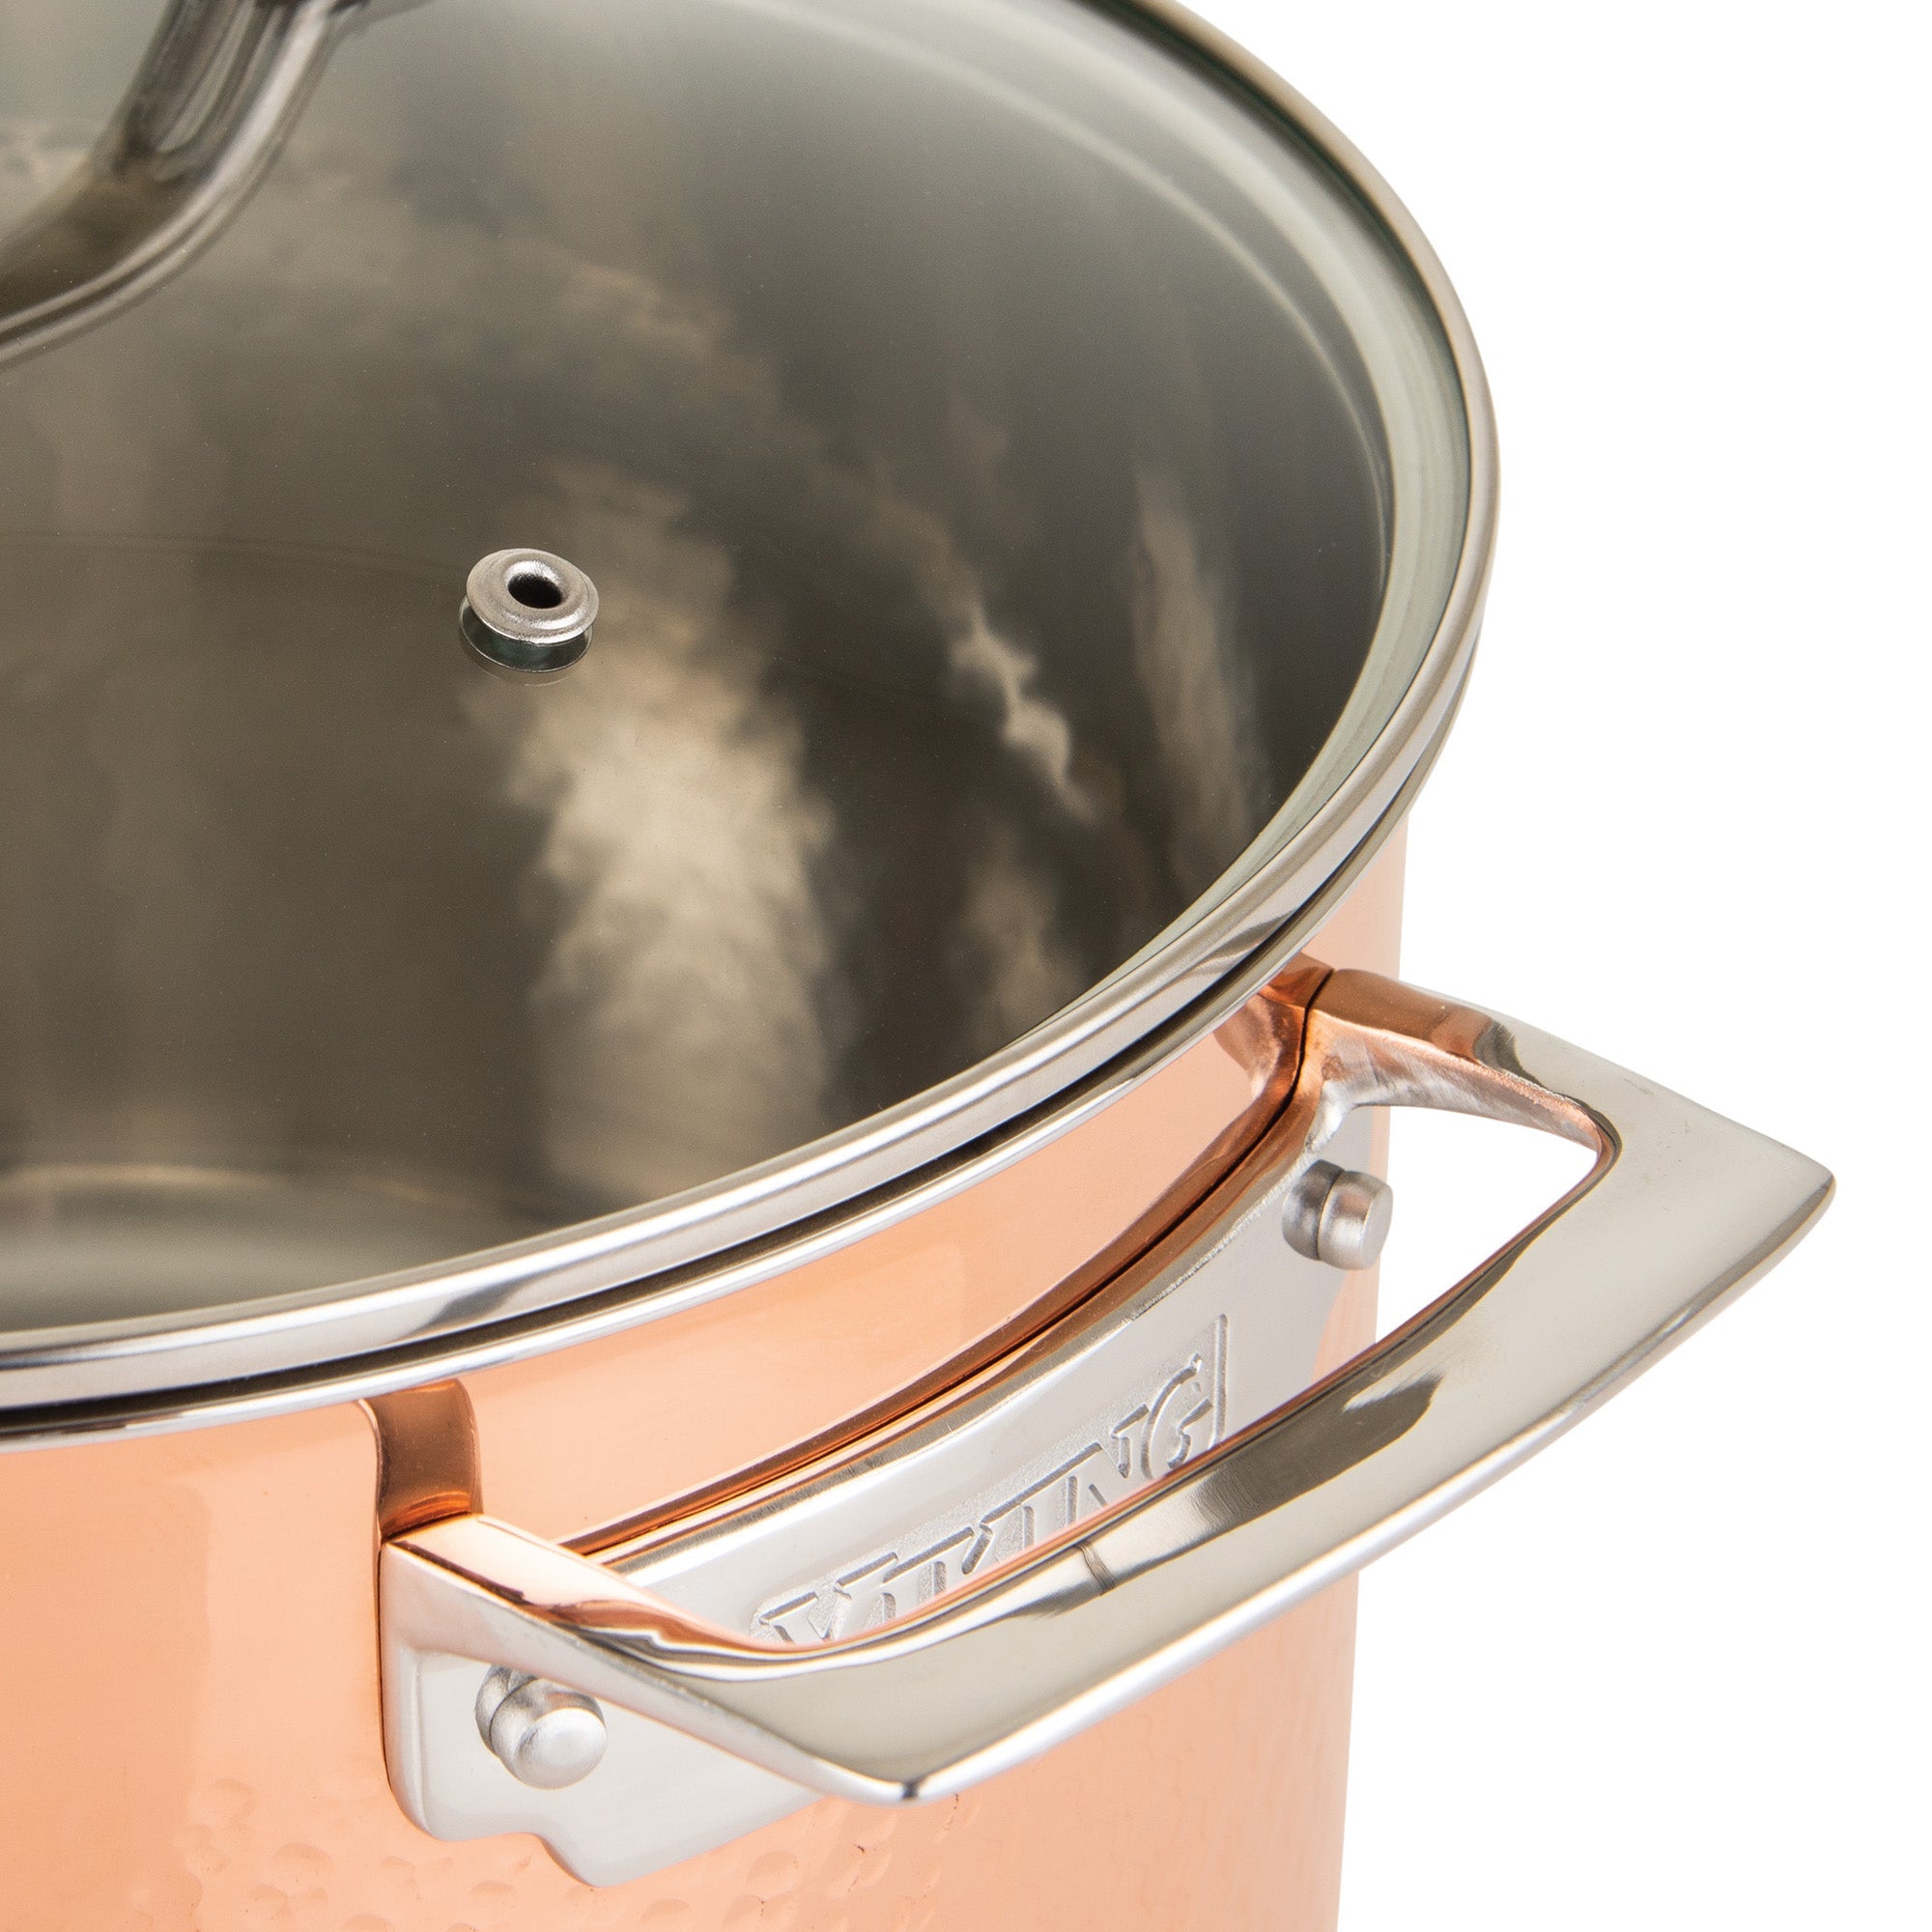 All-Clad c4 Copper 8 Inch Fry Pan